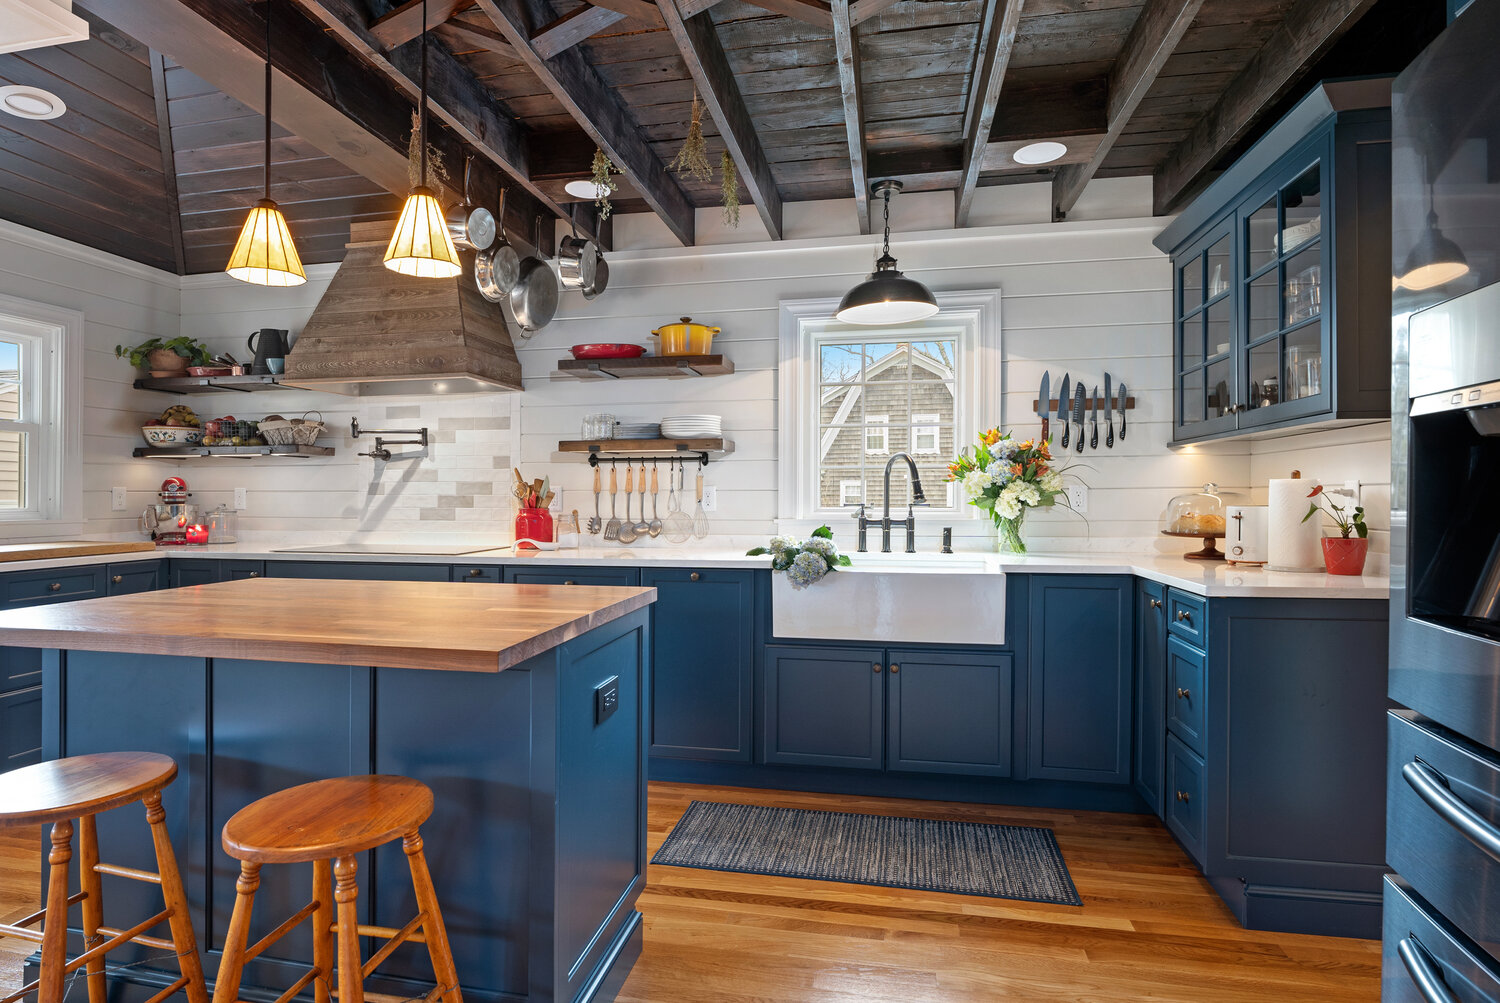 The wood in the floor, ceiling, range hood, and island adds warmth and contrast with the cool colors of the countertop, shiplap, cabinetry, and appliances